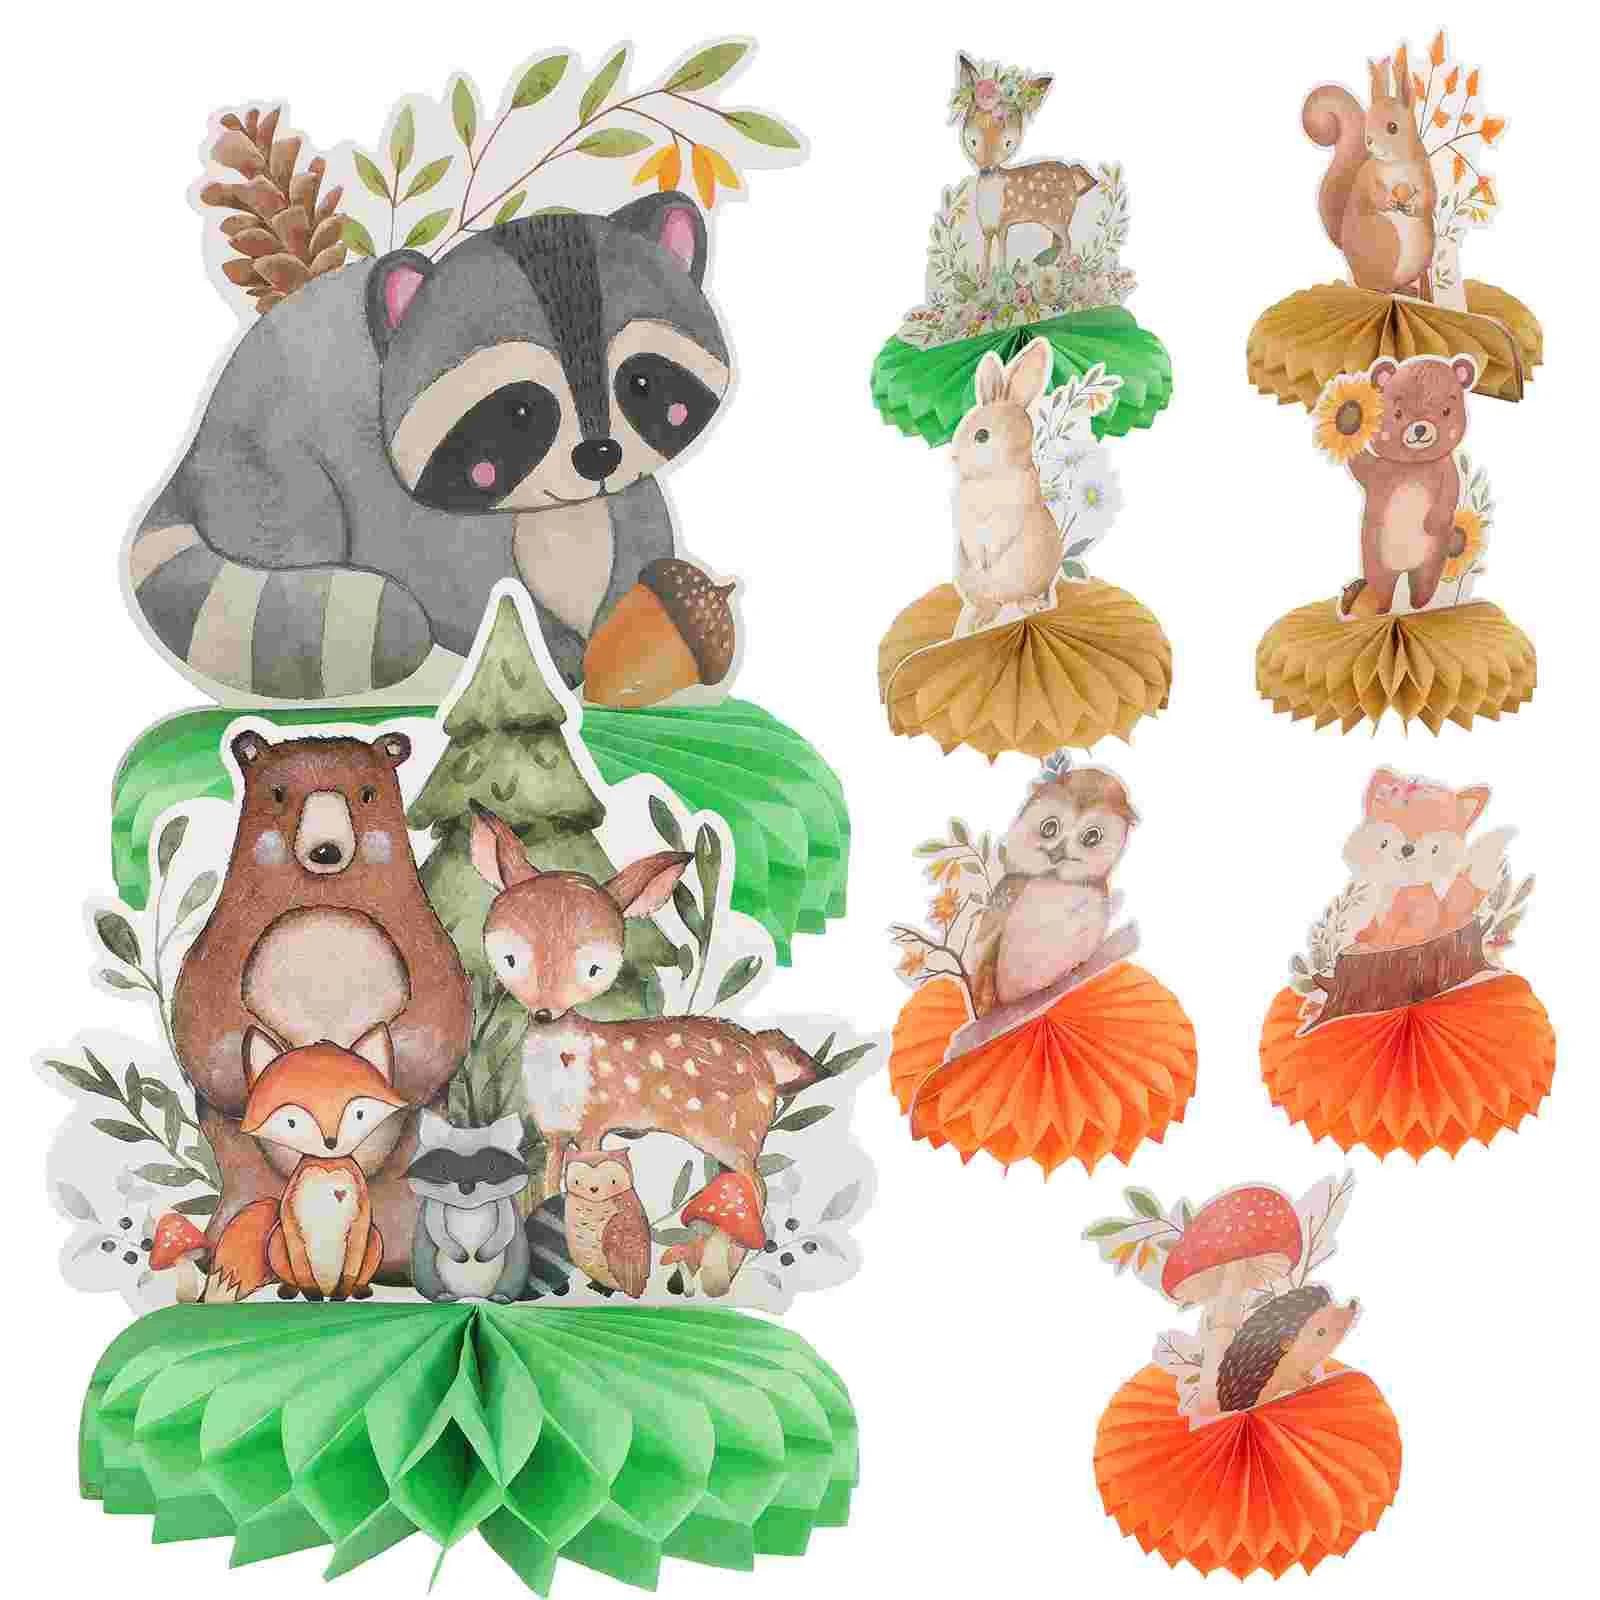 

9 Pcs Ornaments Honeycomb Child Decor Woodland Baby Shower Decorations for Boy 350g White Cardboard Girl